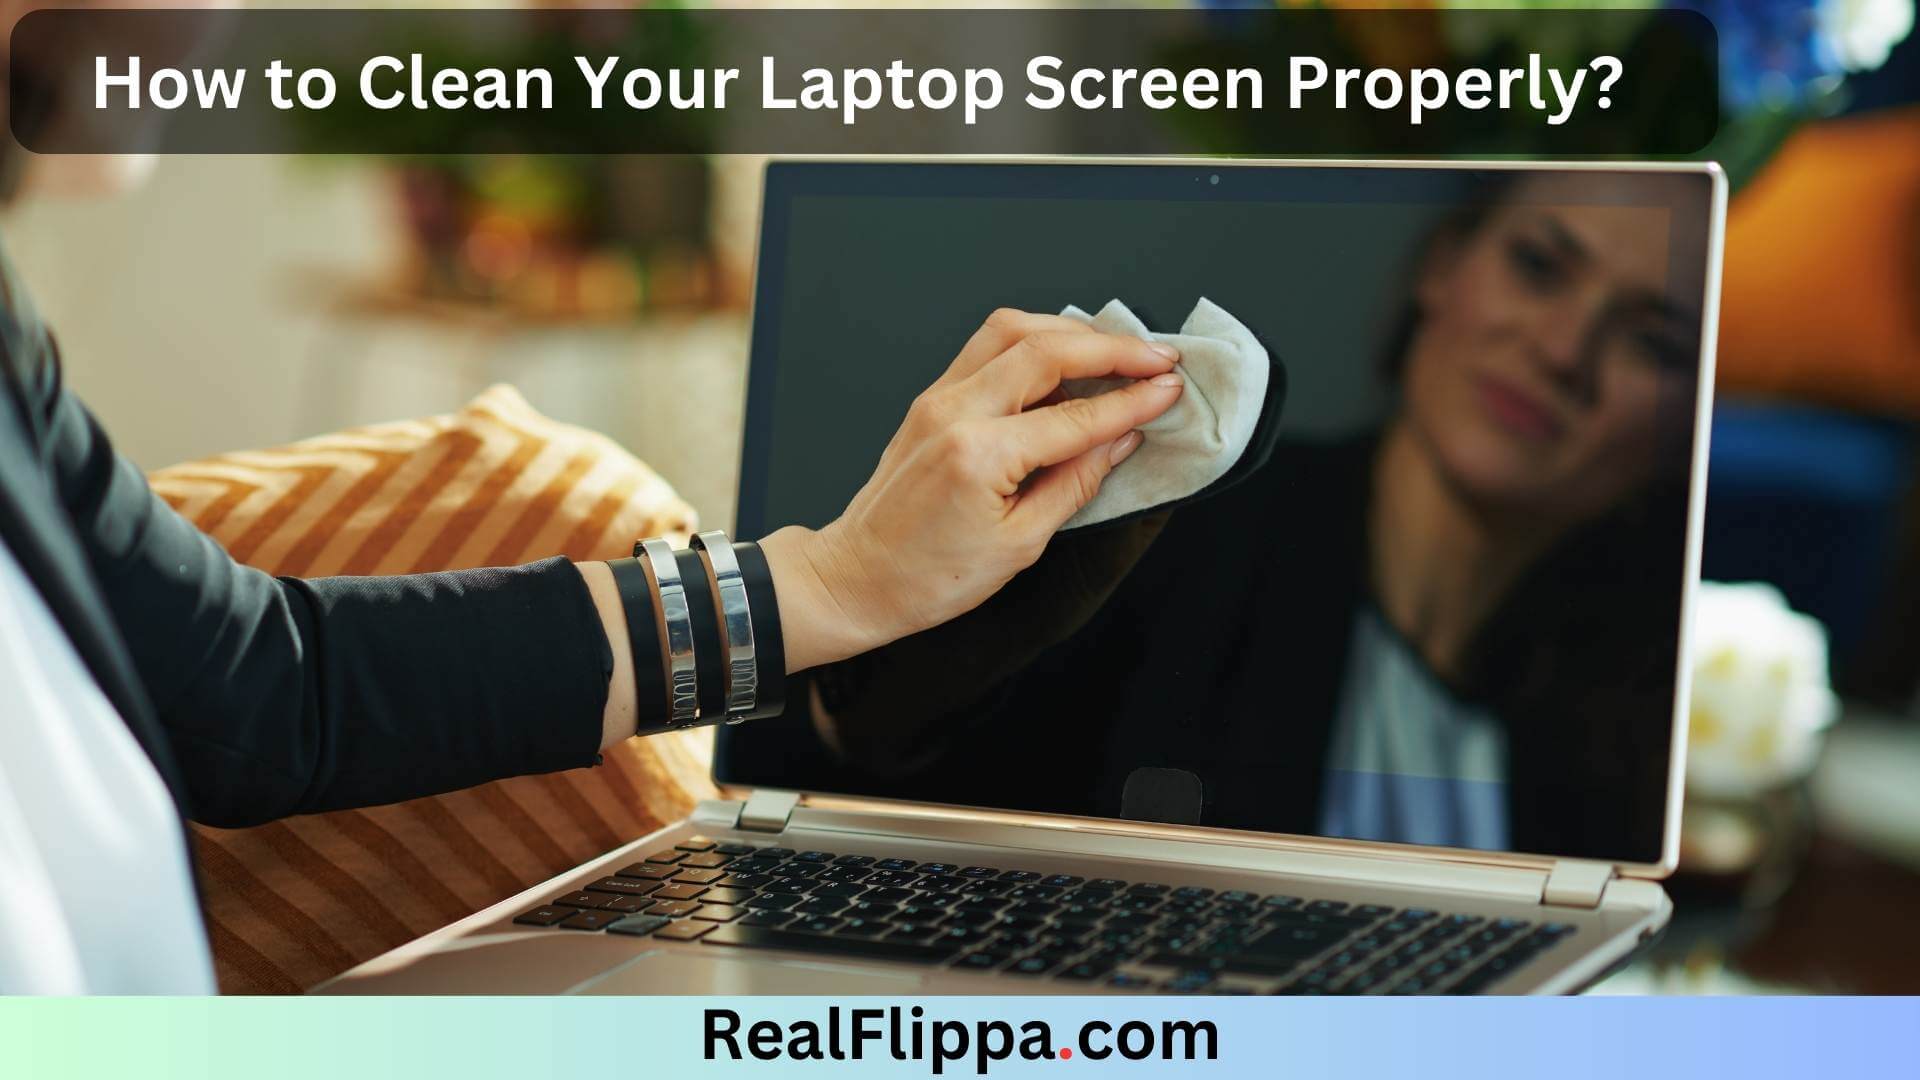 How to Clean Your Laptop Screen Properly